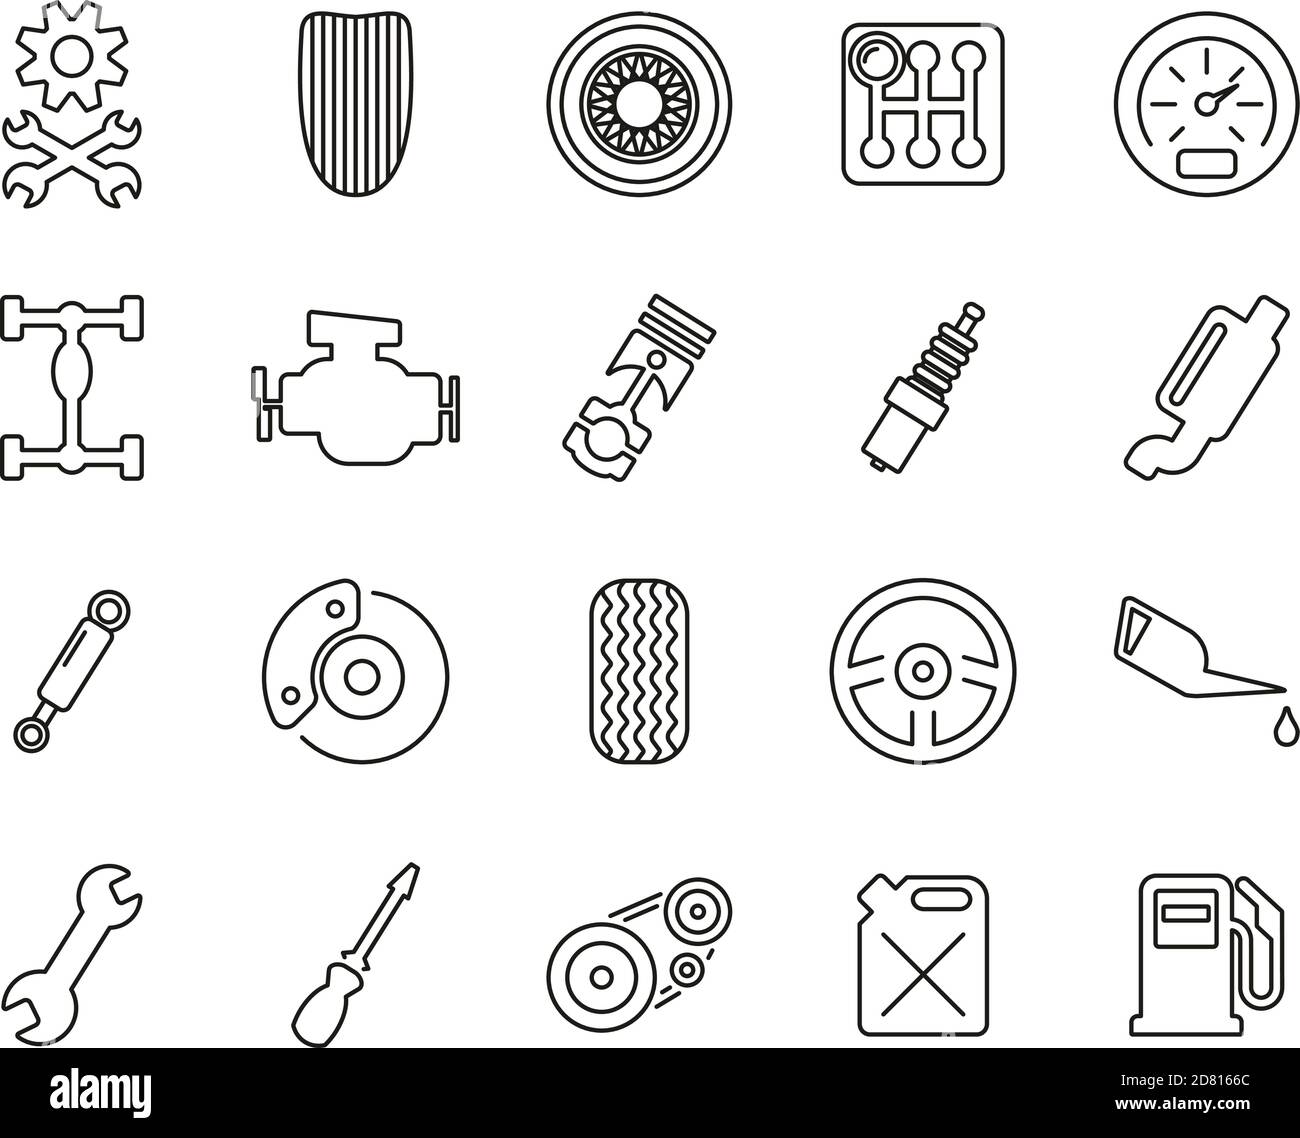 Hot Rod Culture & Parts Icons Black & White Thin Line Set Big Stock Vector